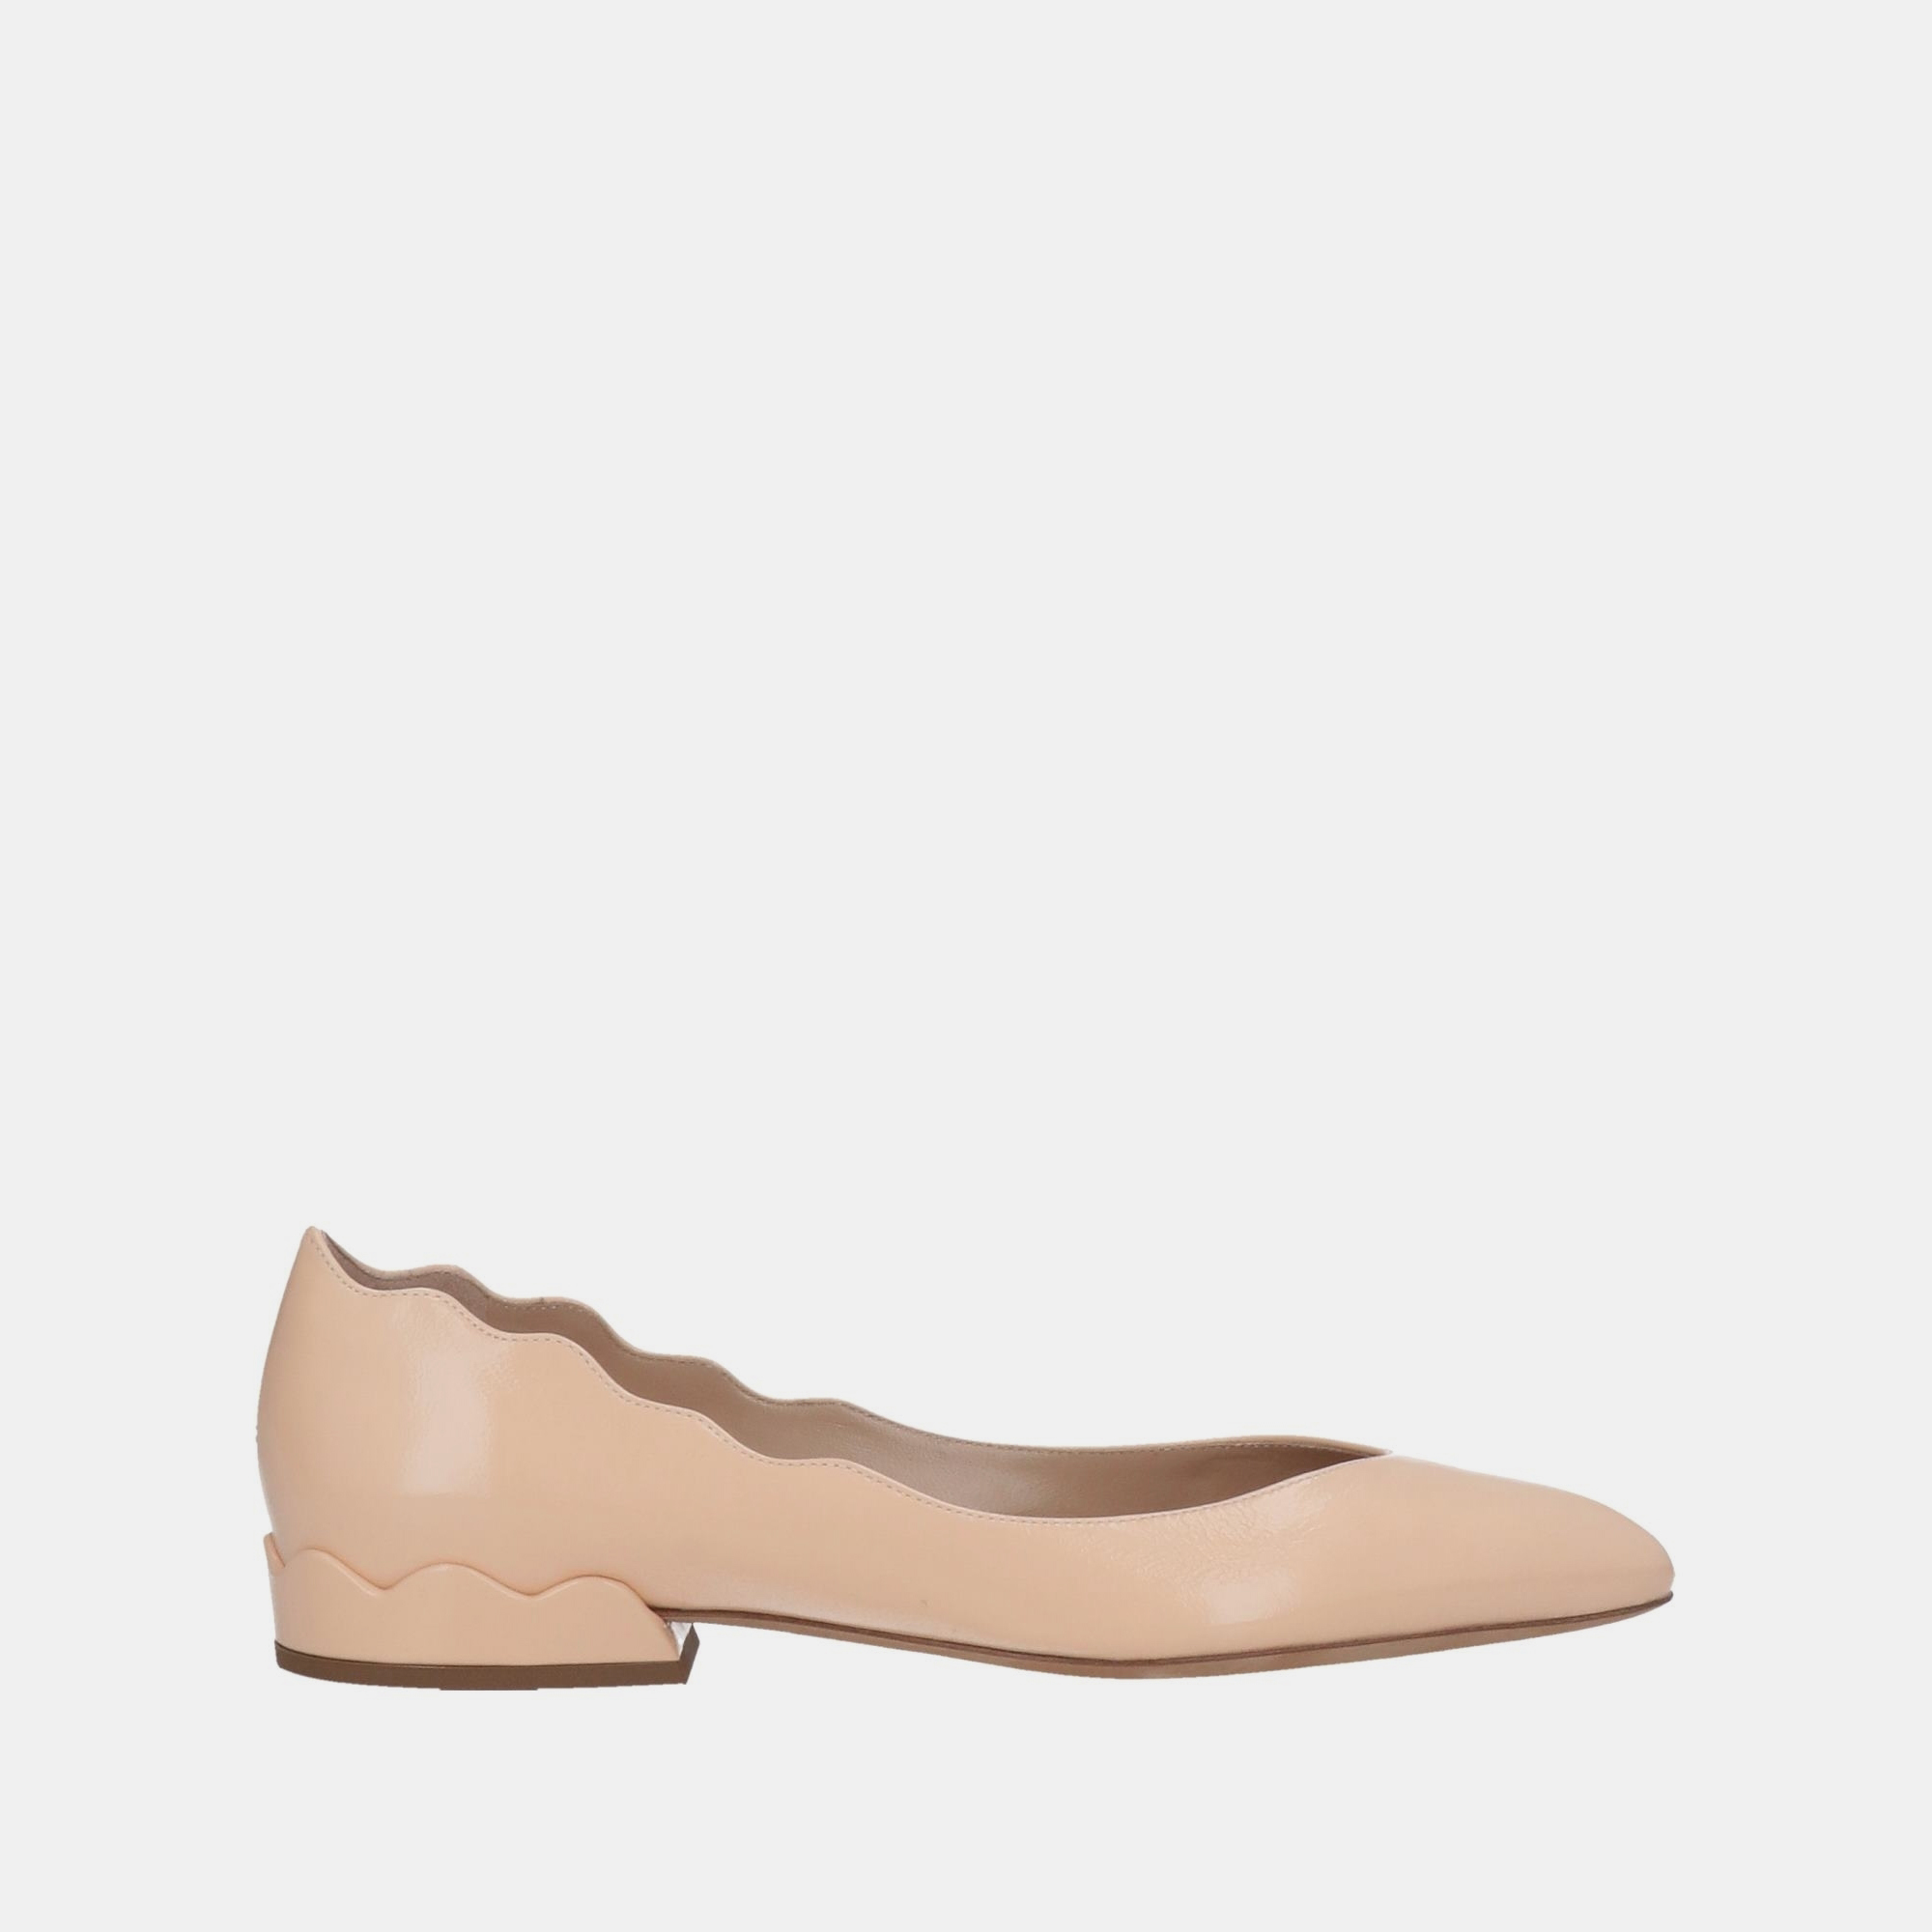 Pre-owned Chloé Peach Pink Patent Leather Ballet Flats 39